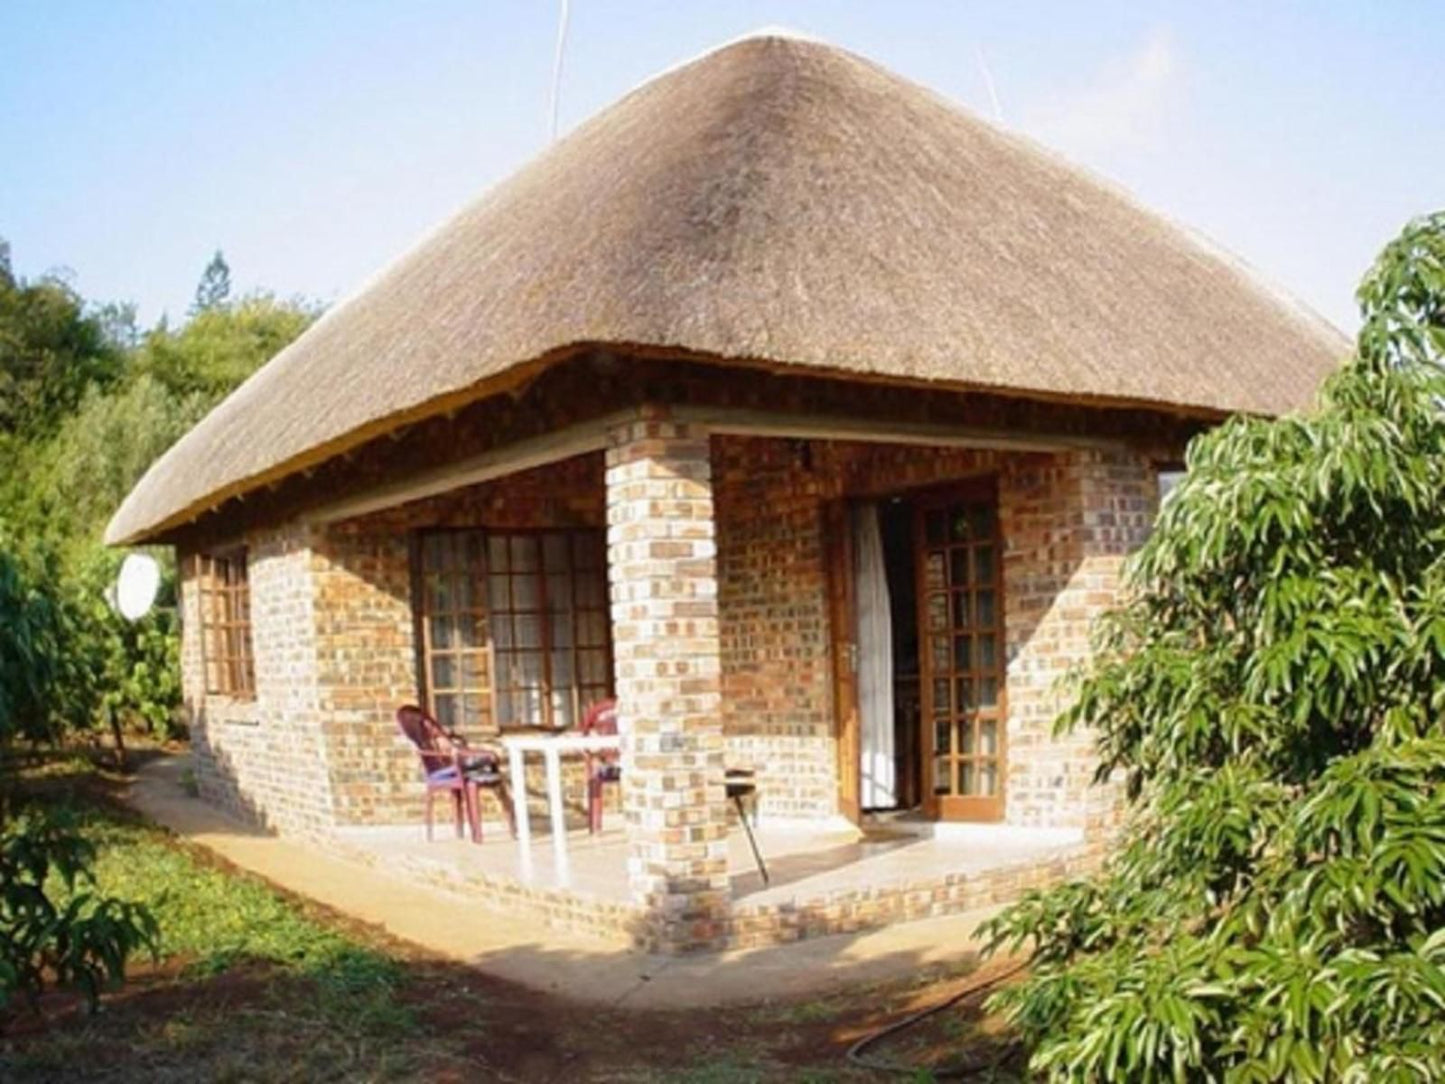 Orchards Farm Cottages Komatipoort Mpumalanga South Africa Building, Architecture